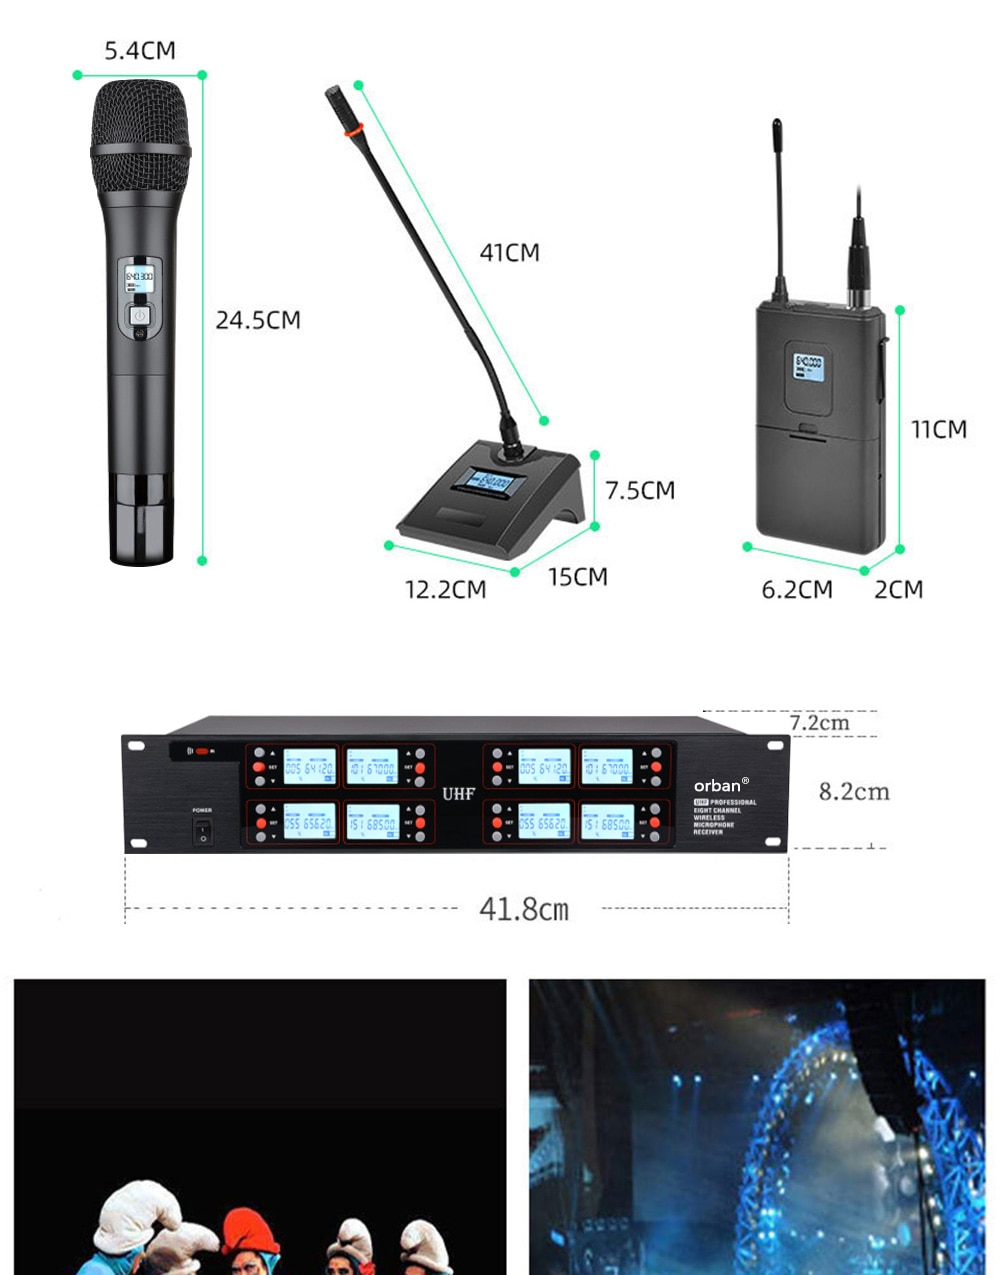 Professional-UHF-wireless-microphone-handheld-lavalier-microphone-stage-performance-church-family-ka-1005002404207705